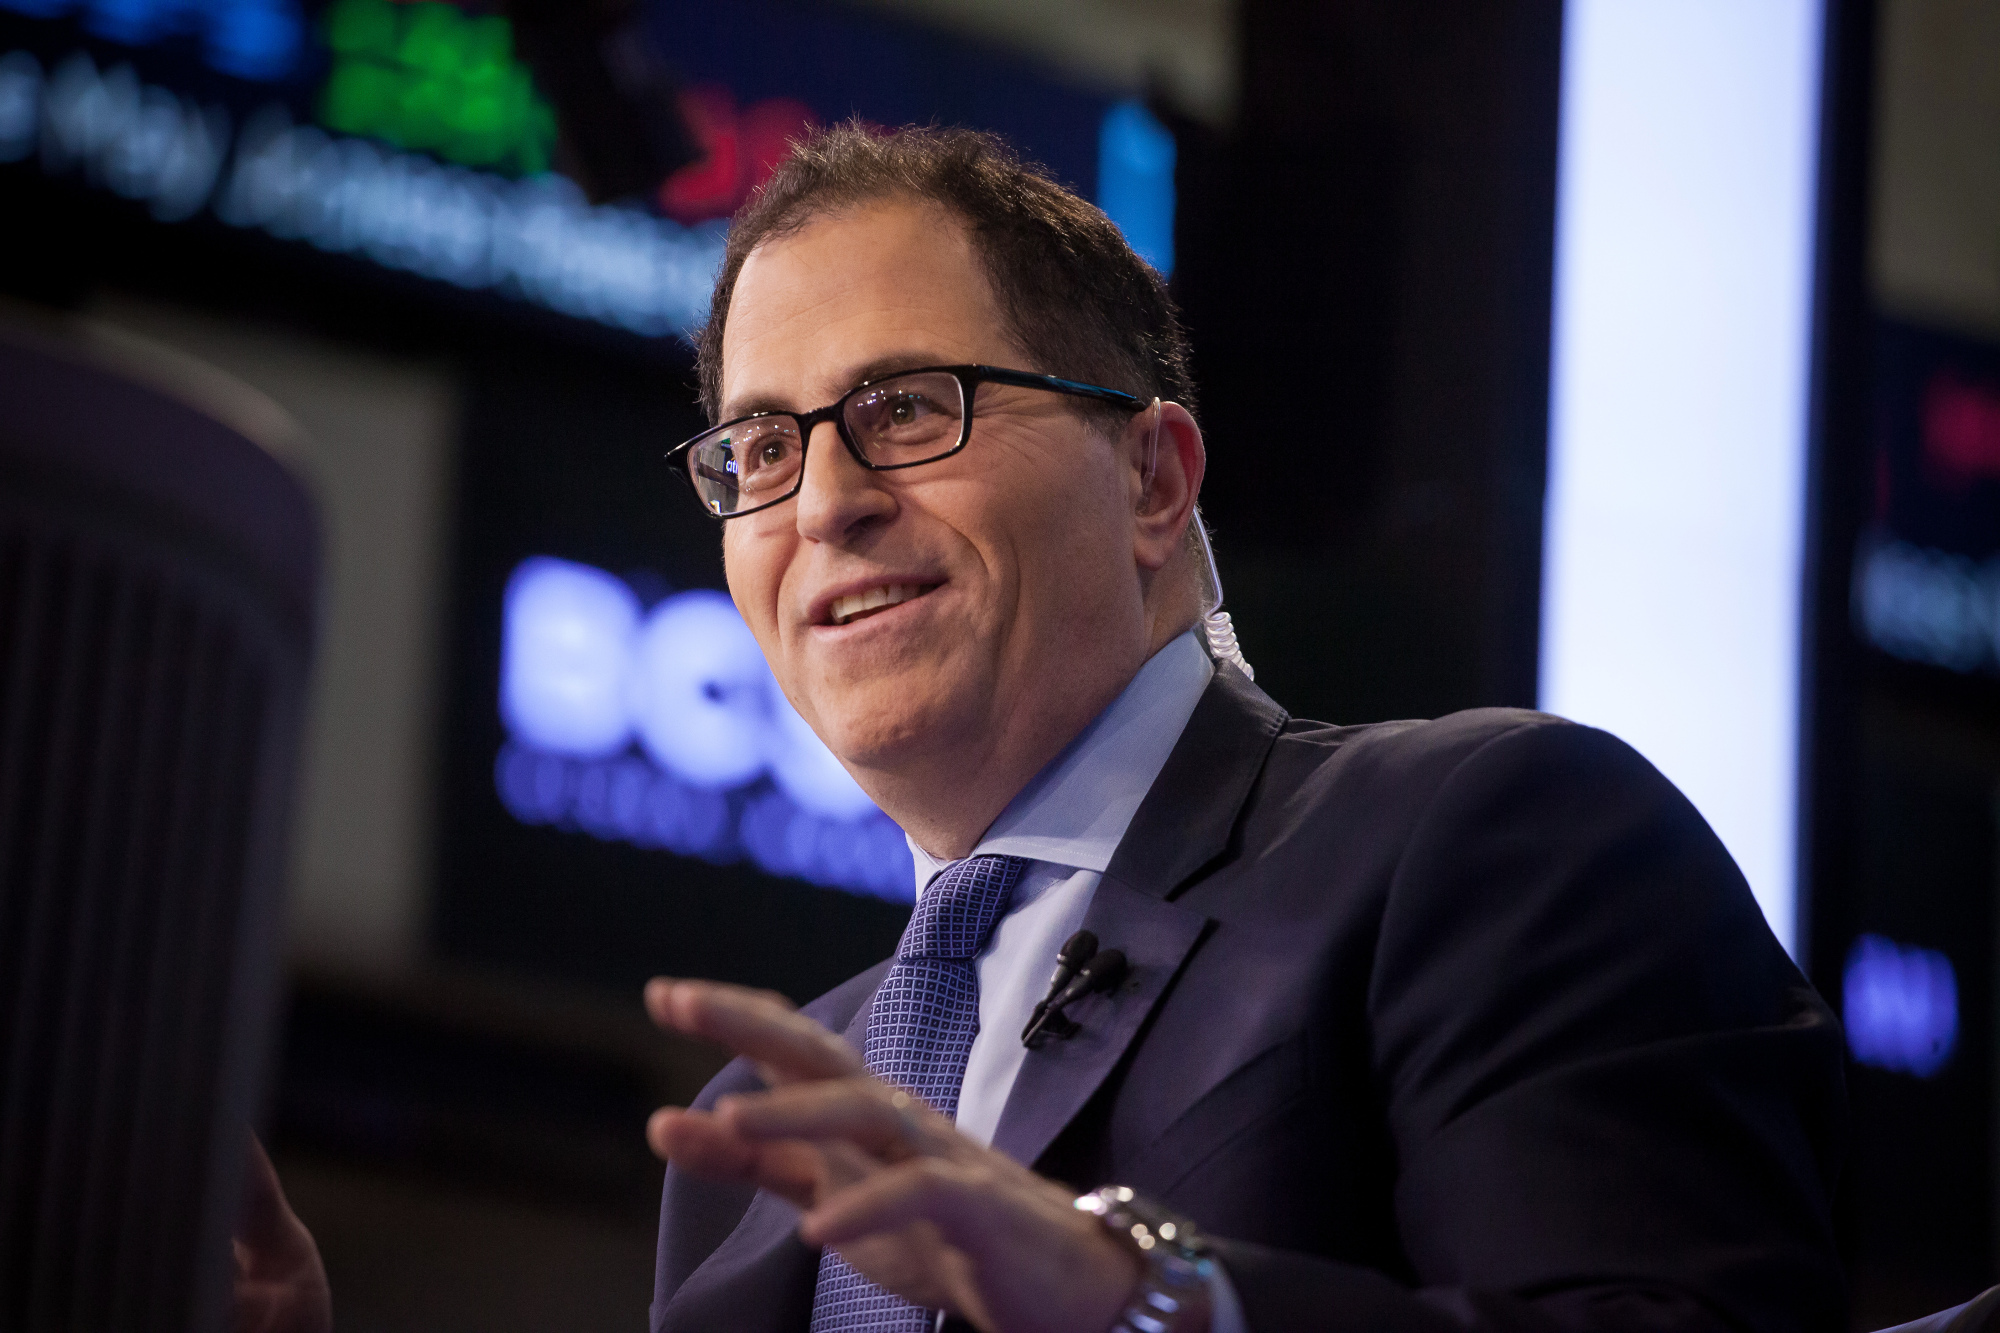 Michael Dell, chief executive officer of Dell Technologies Inc.